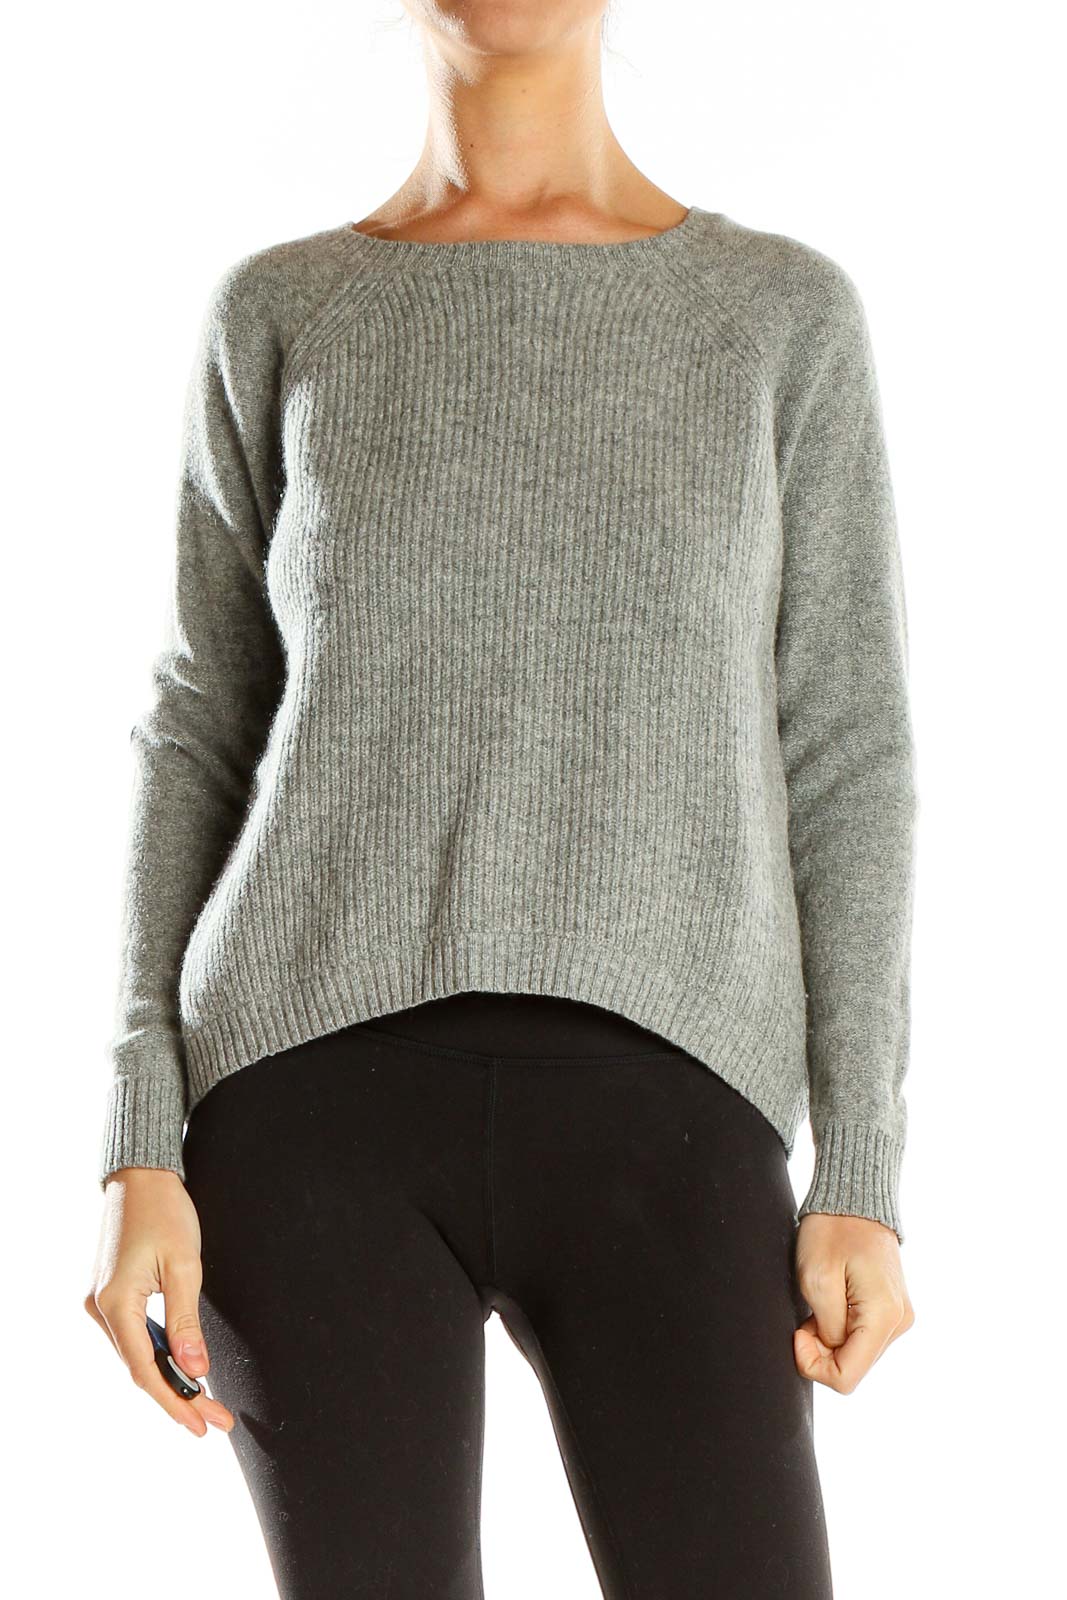 Gray Sweater With Leather Elbow Patches Front